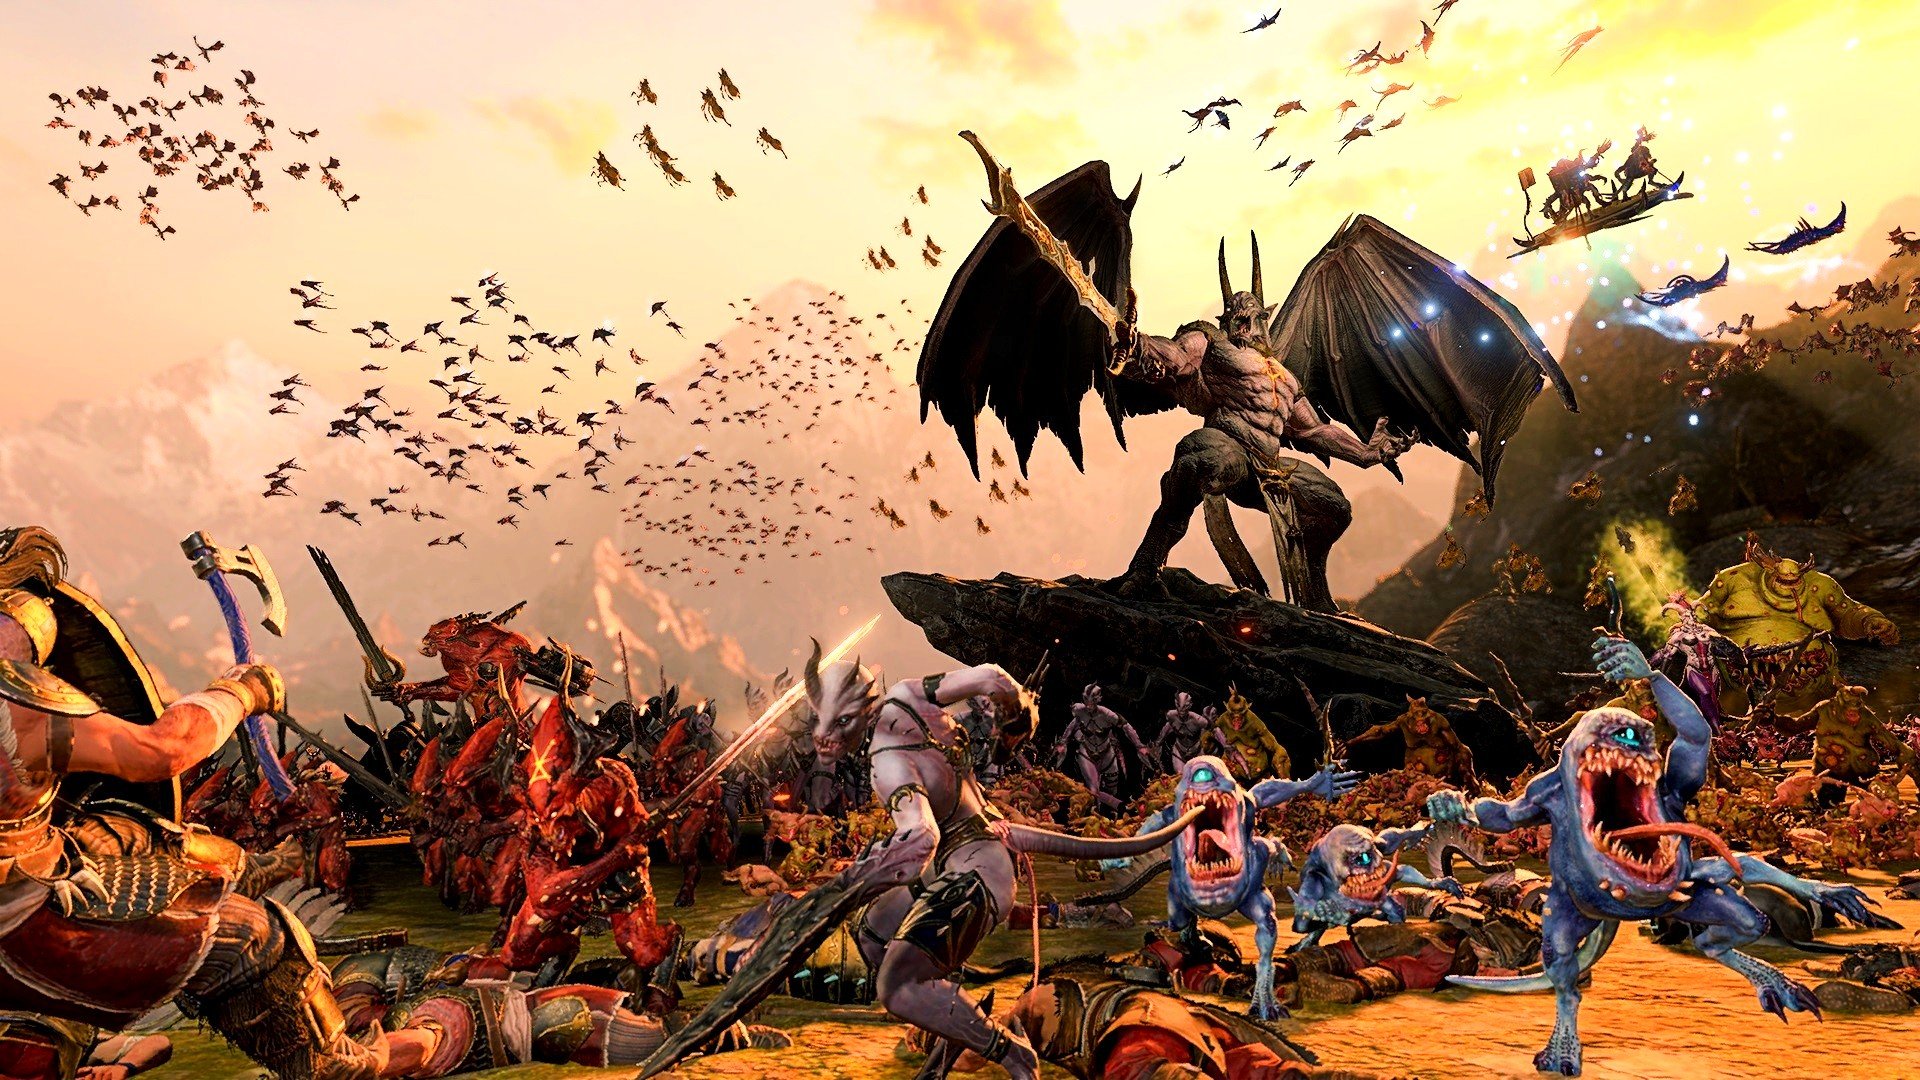 CHINESE PLAYERS REVIEW BOMING TOTAL WAR: WARHAMMER 3, OVER IT PRE-LAUNCHMARKETING STRATEGY